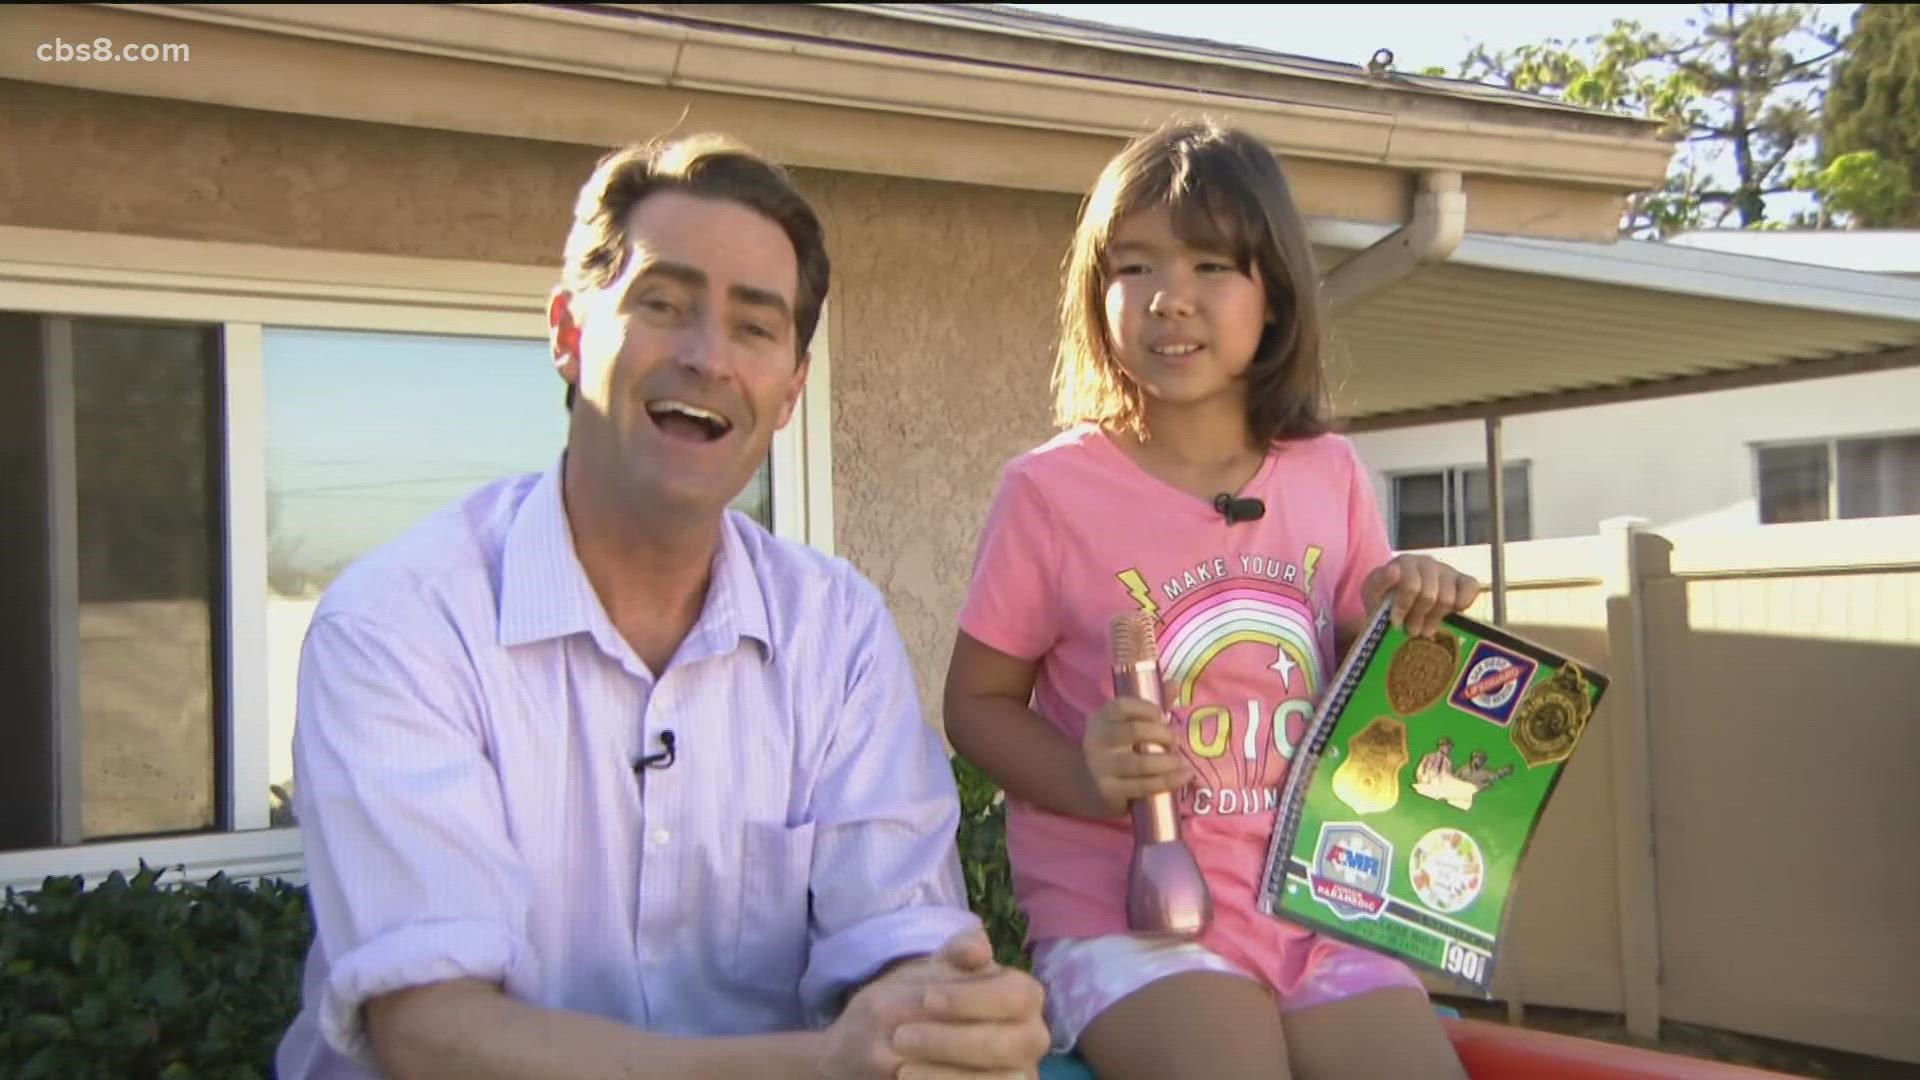 A fourth-grader from Clairemont may just be the next Barbara Walters.